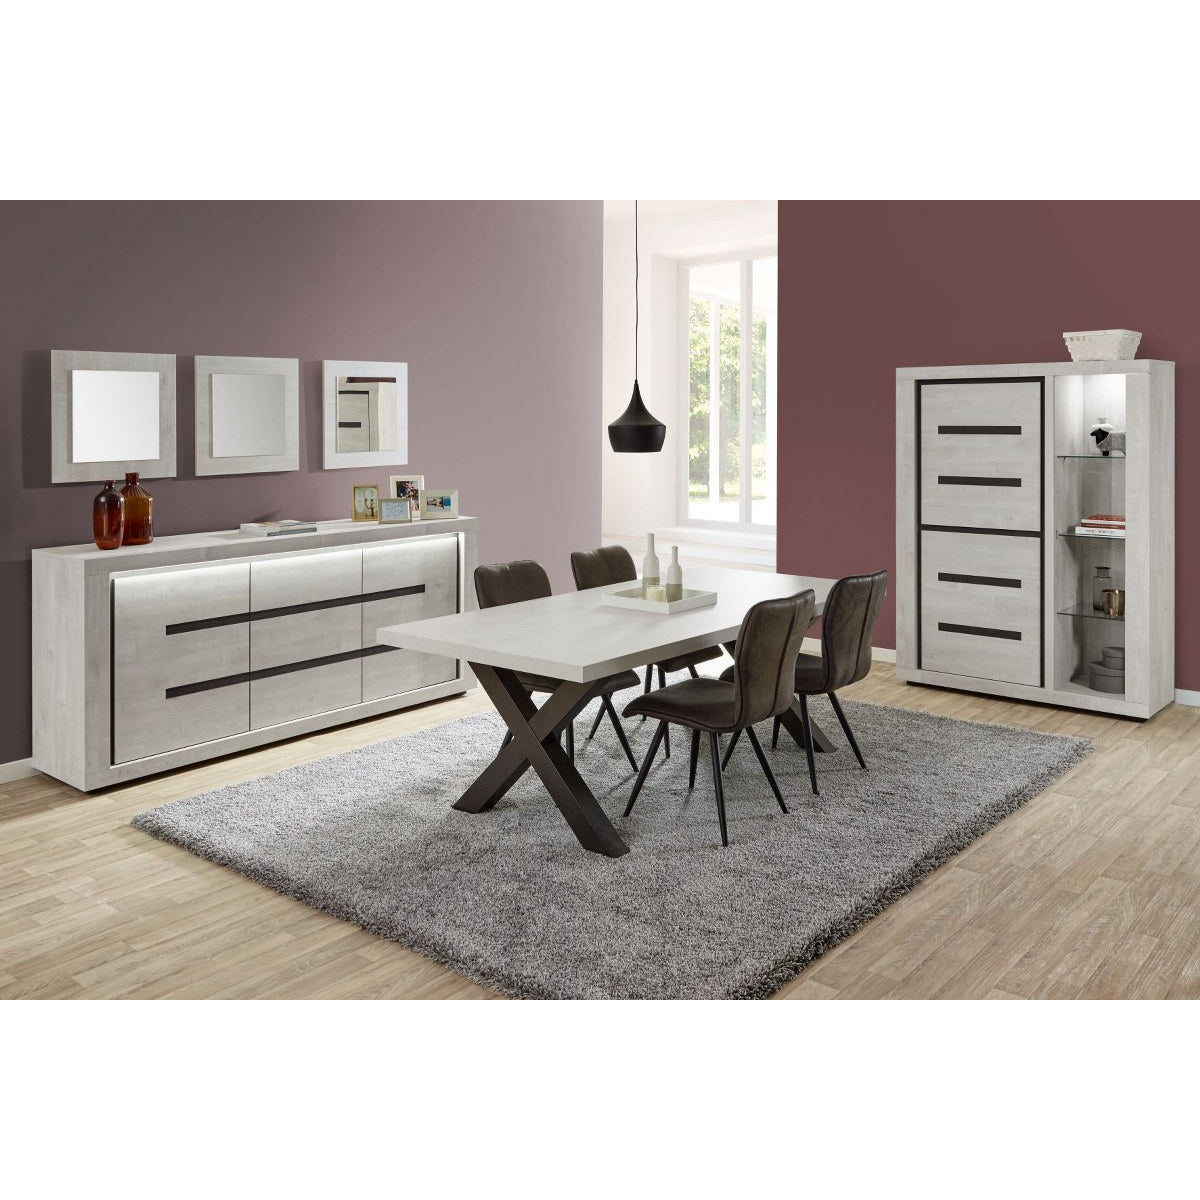 Wall cabinet | Furniture series Vento | light gray, natural | 132x